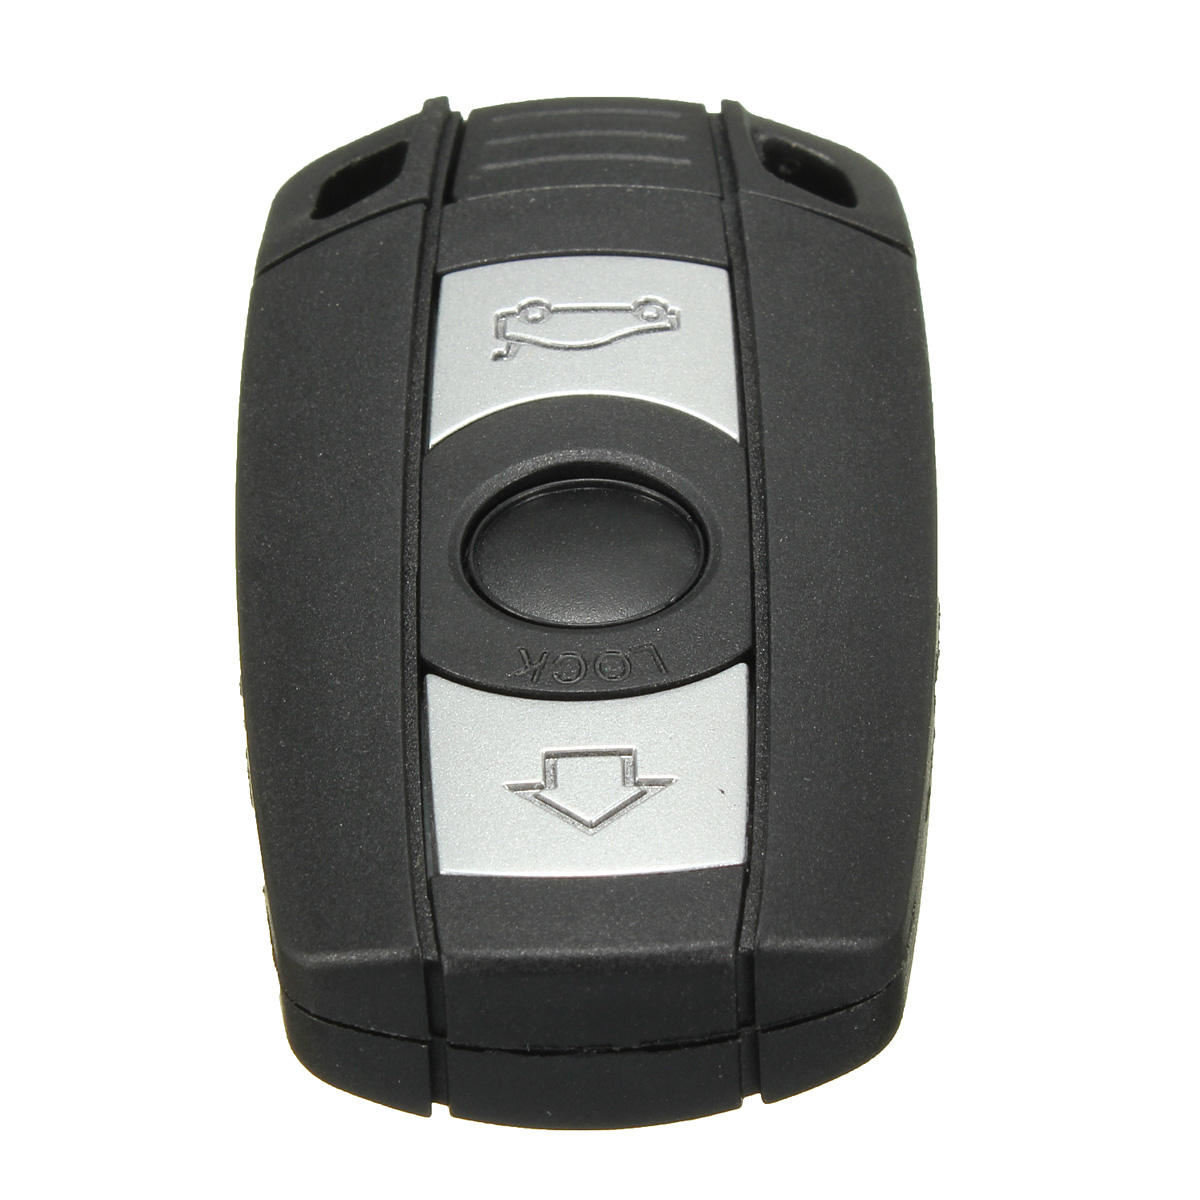 Replacement keyless entry smart uncut blade remote key case for bmw